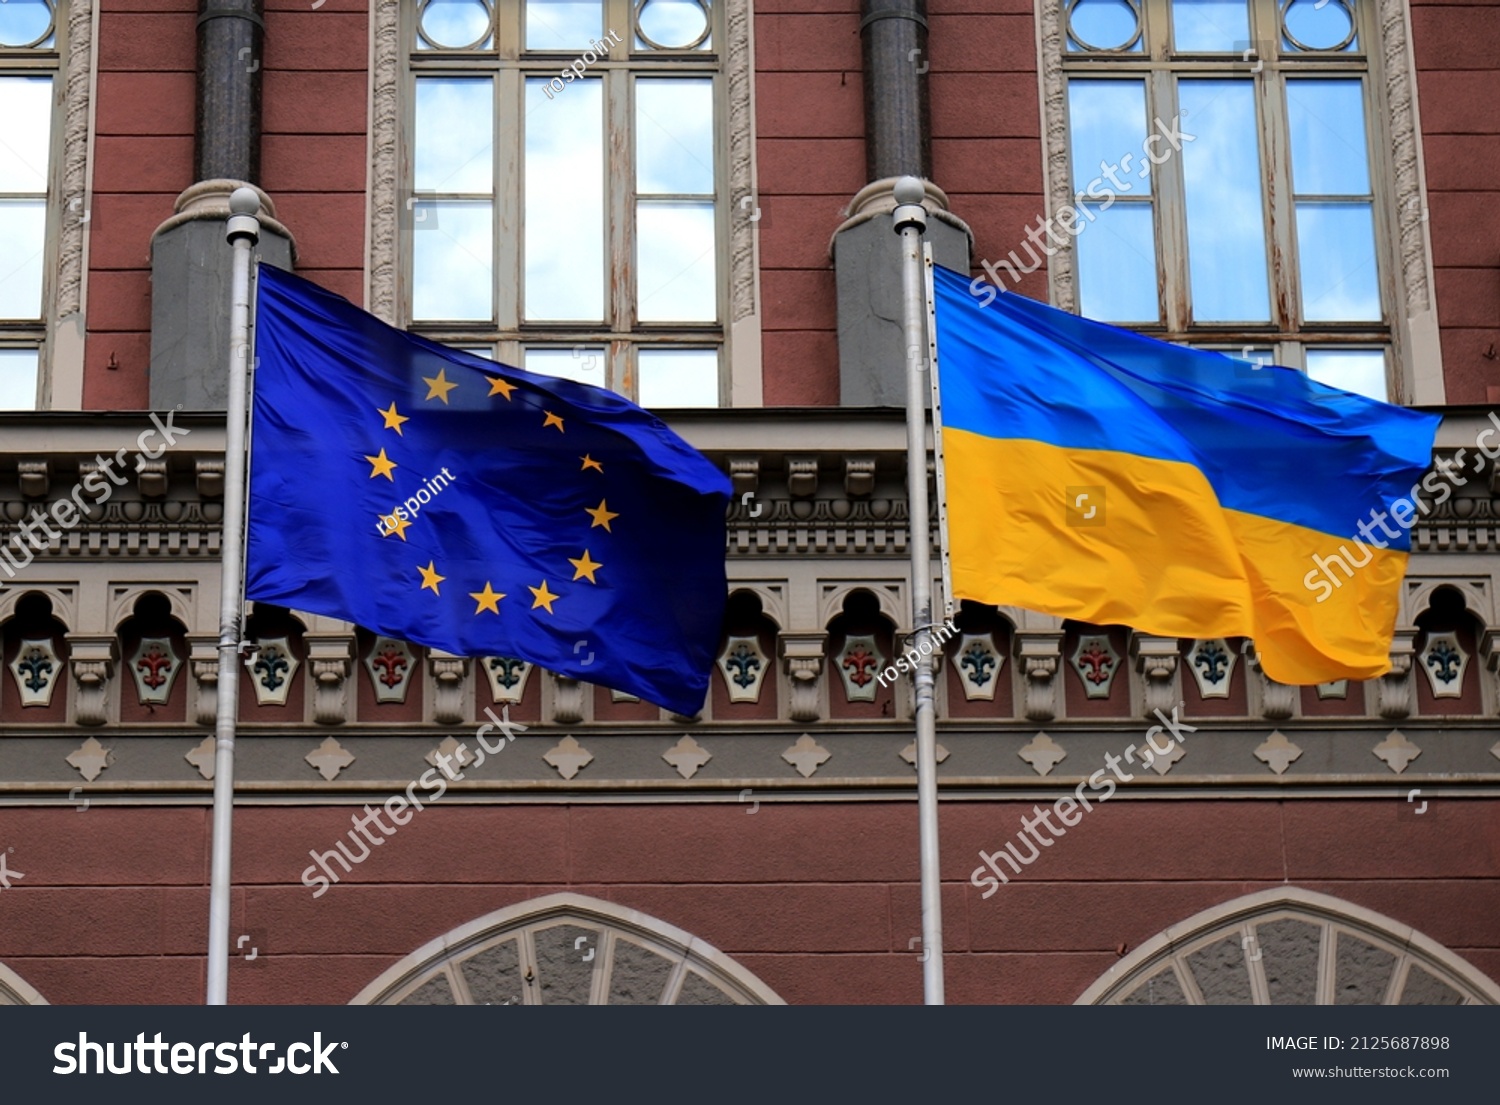 Flags of Ukraine and European Union in Kiev. Yellow-blue state Ukrainian and European Union flags in Kyiv, near  National Bank, Independence Constitution Day, National holiday. #2125687898